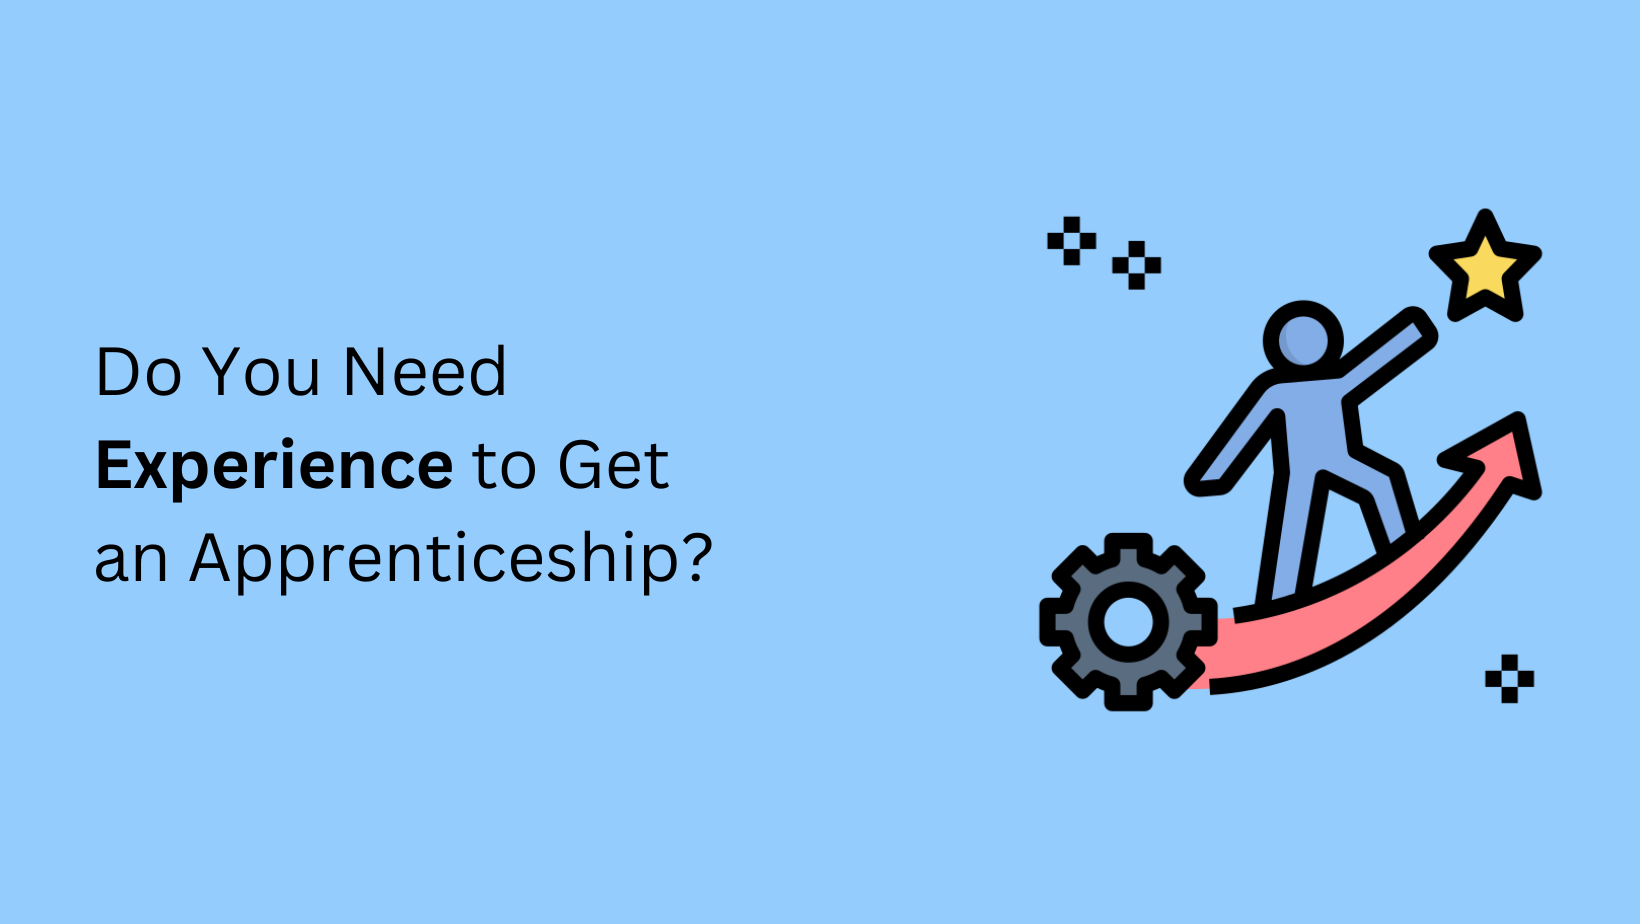 Do You Need Experience to Get an Apprenticeship